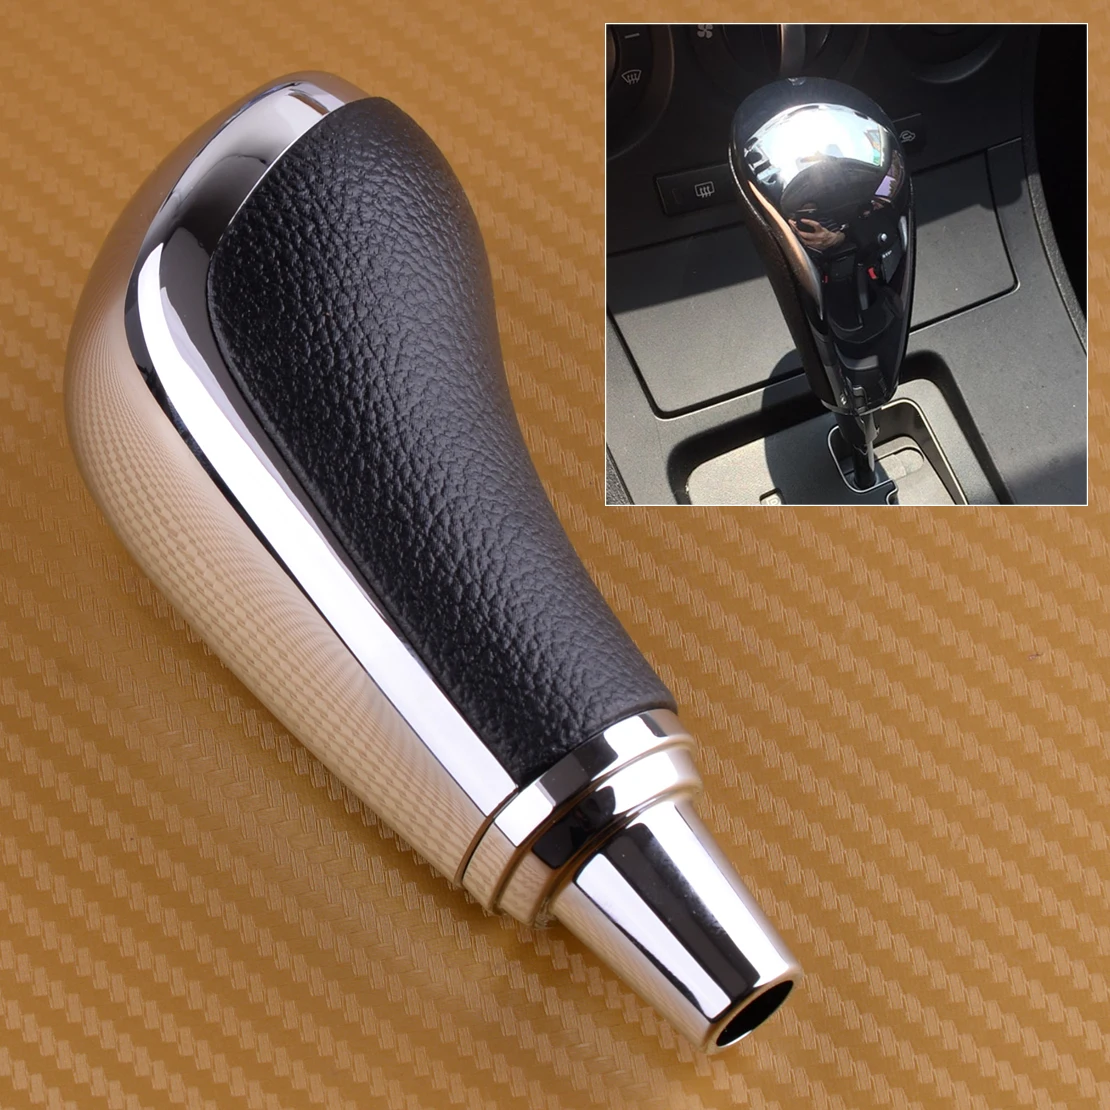 CITALL Black Chrome Plated Car Automatic Transmission Gear Shift Knob Fit for Mazda 6 3 5 8 CX-7 2011